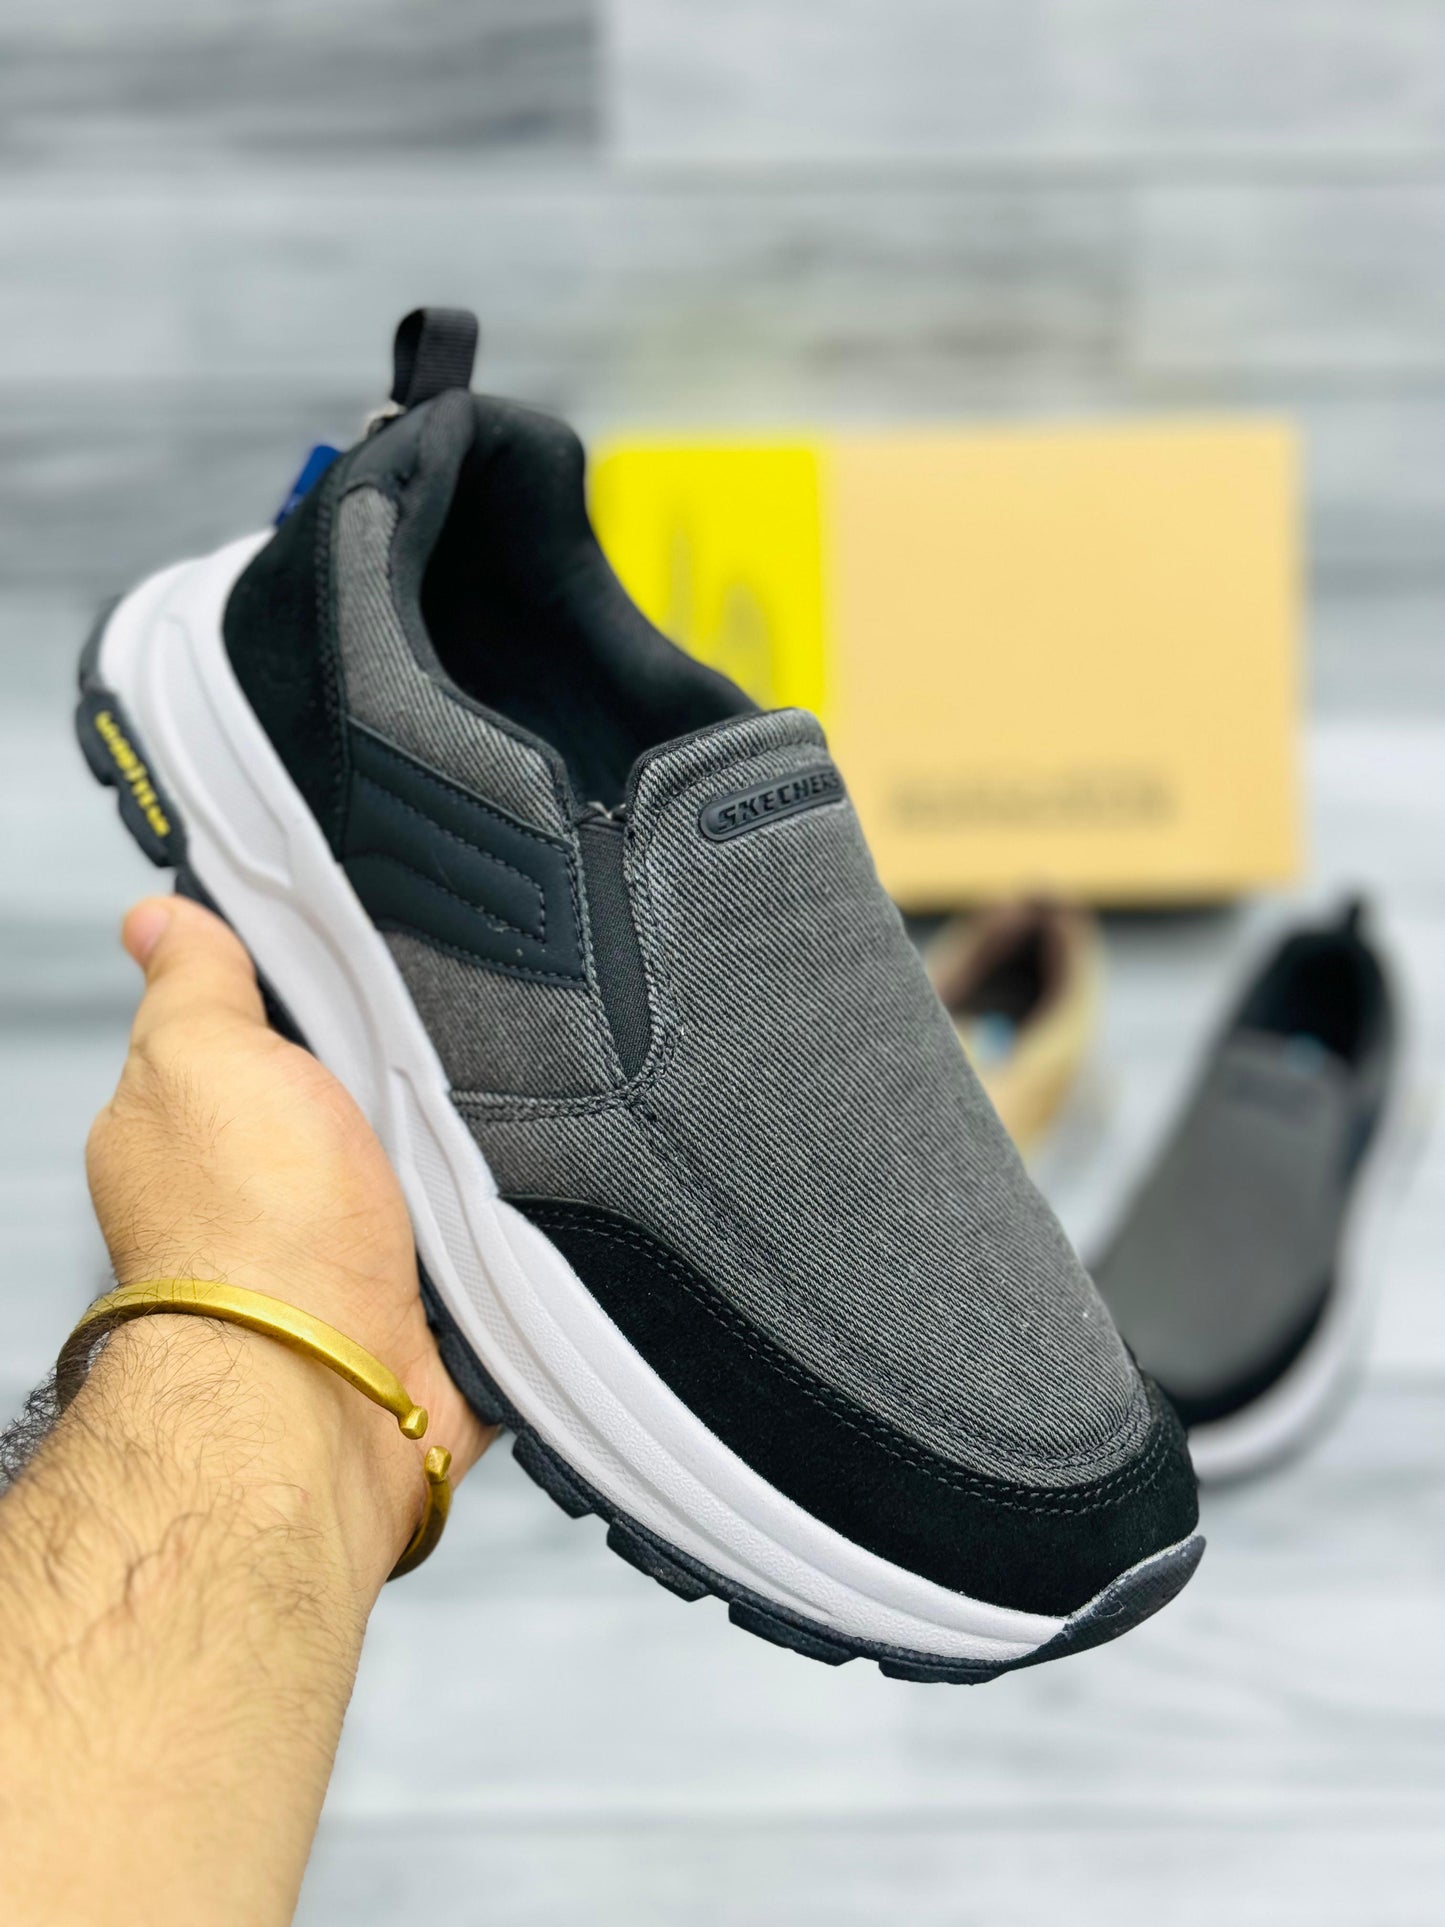 Skecher Air cooled - Gray